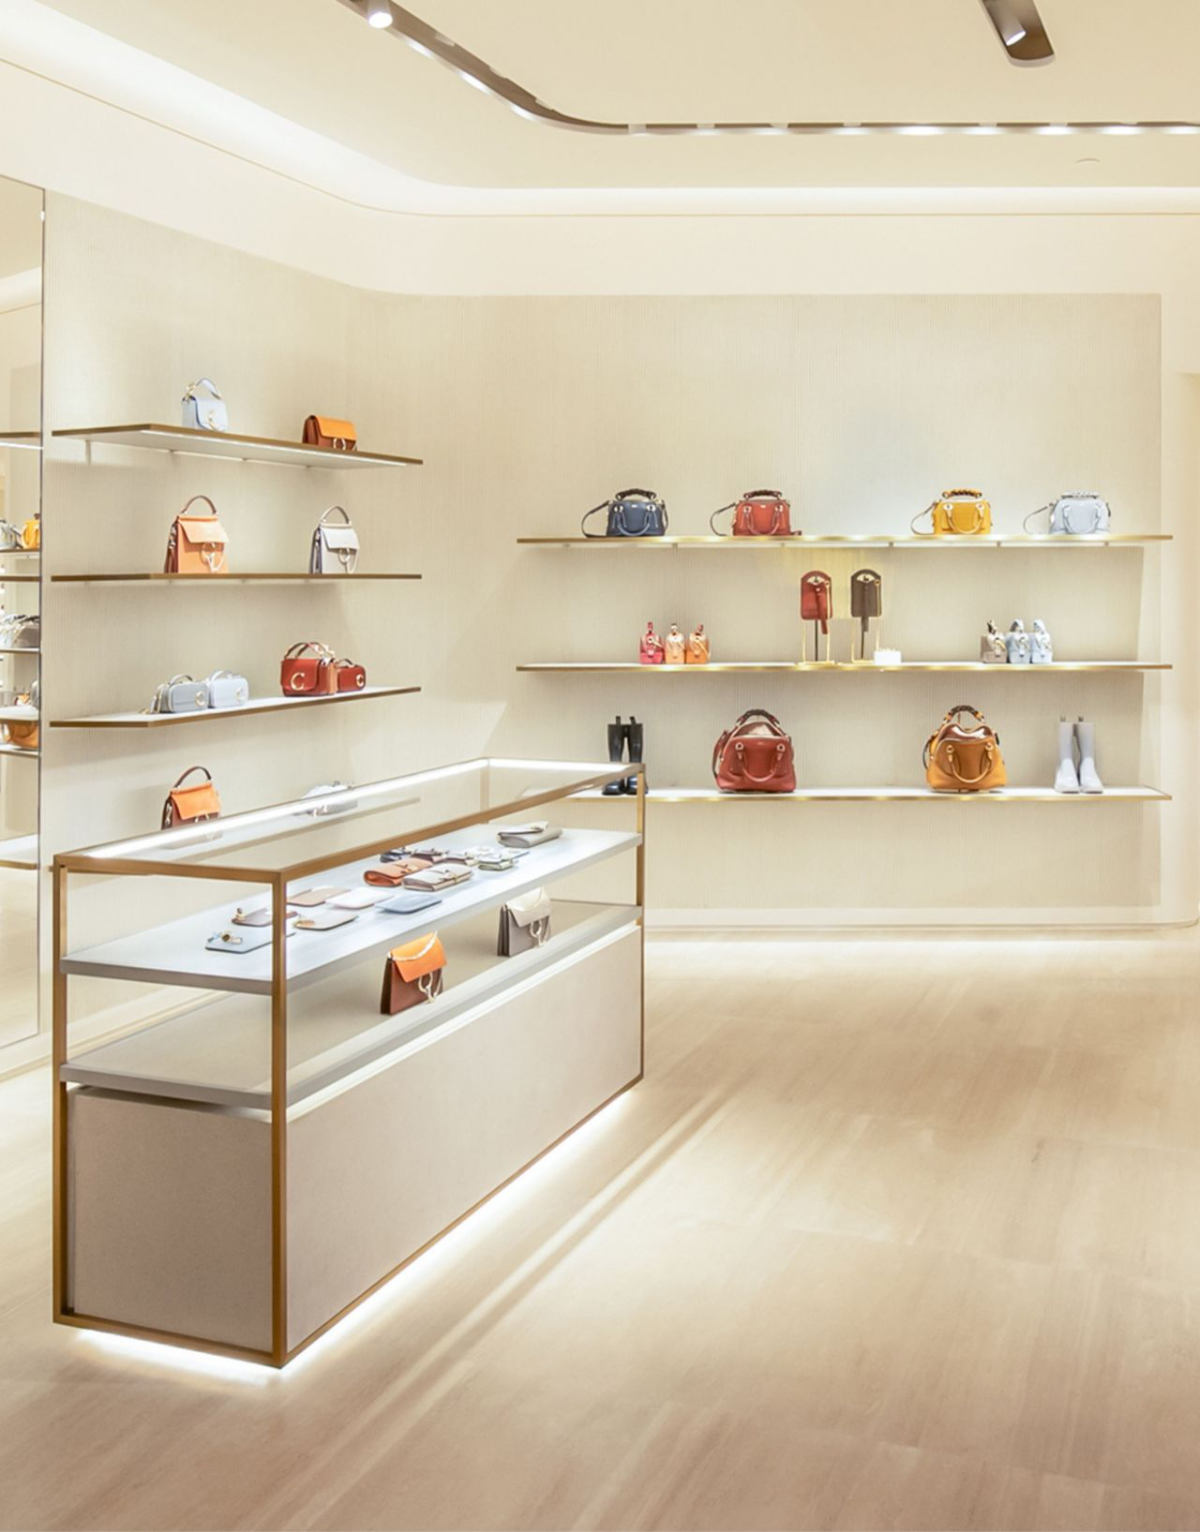 Latest Chloé boutique in the Taikoo Hui Guangzhou-Shopping Mall in China